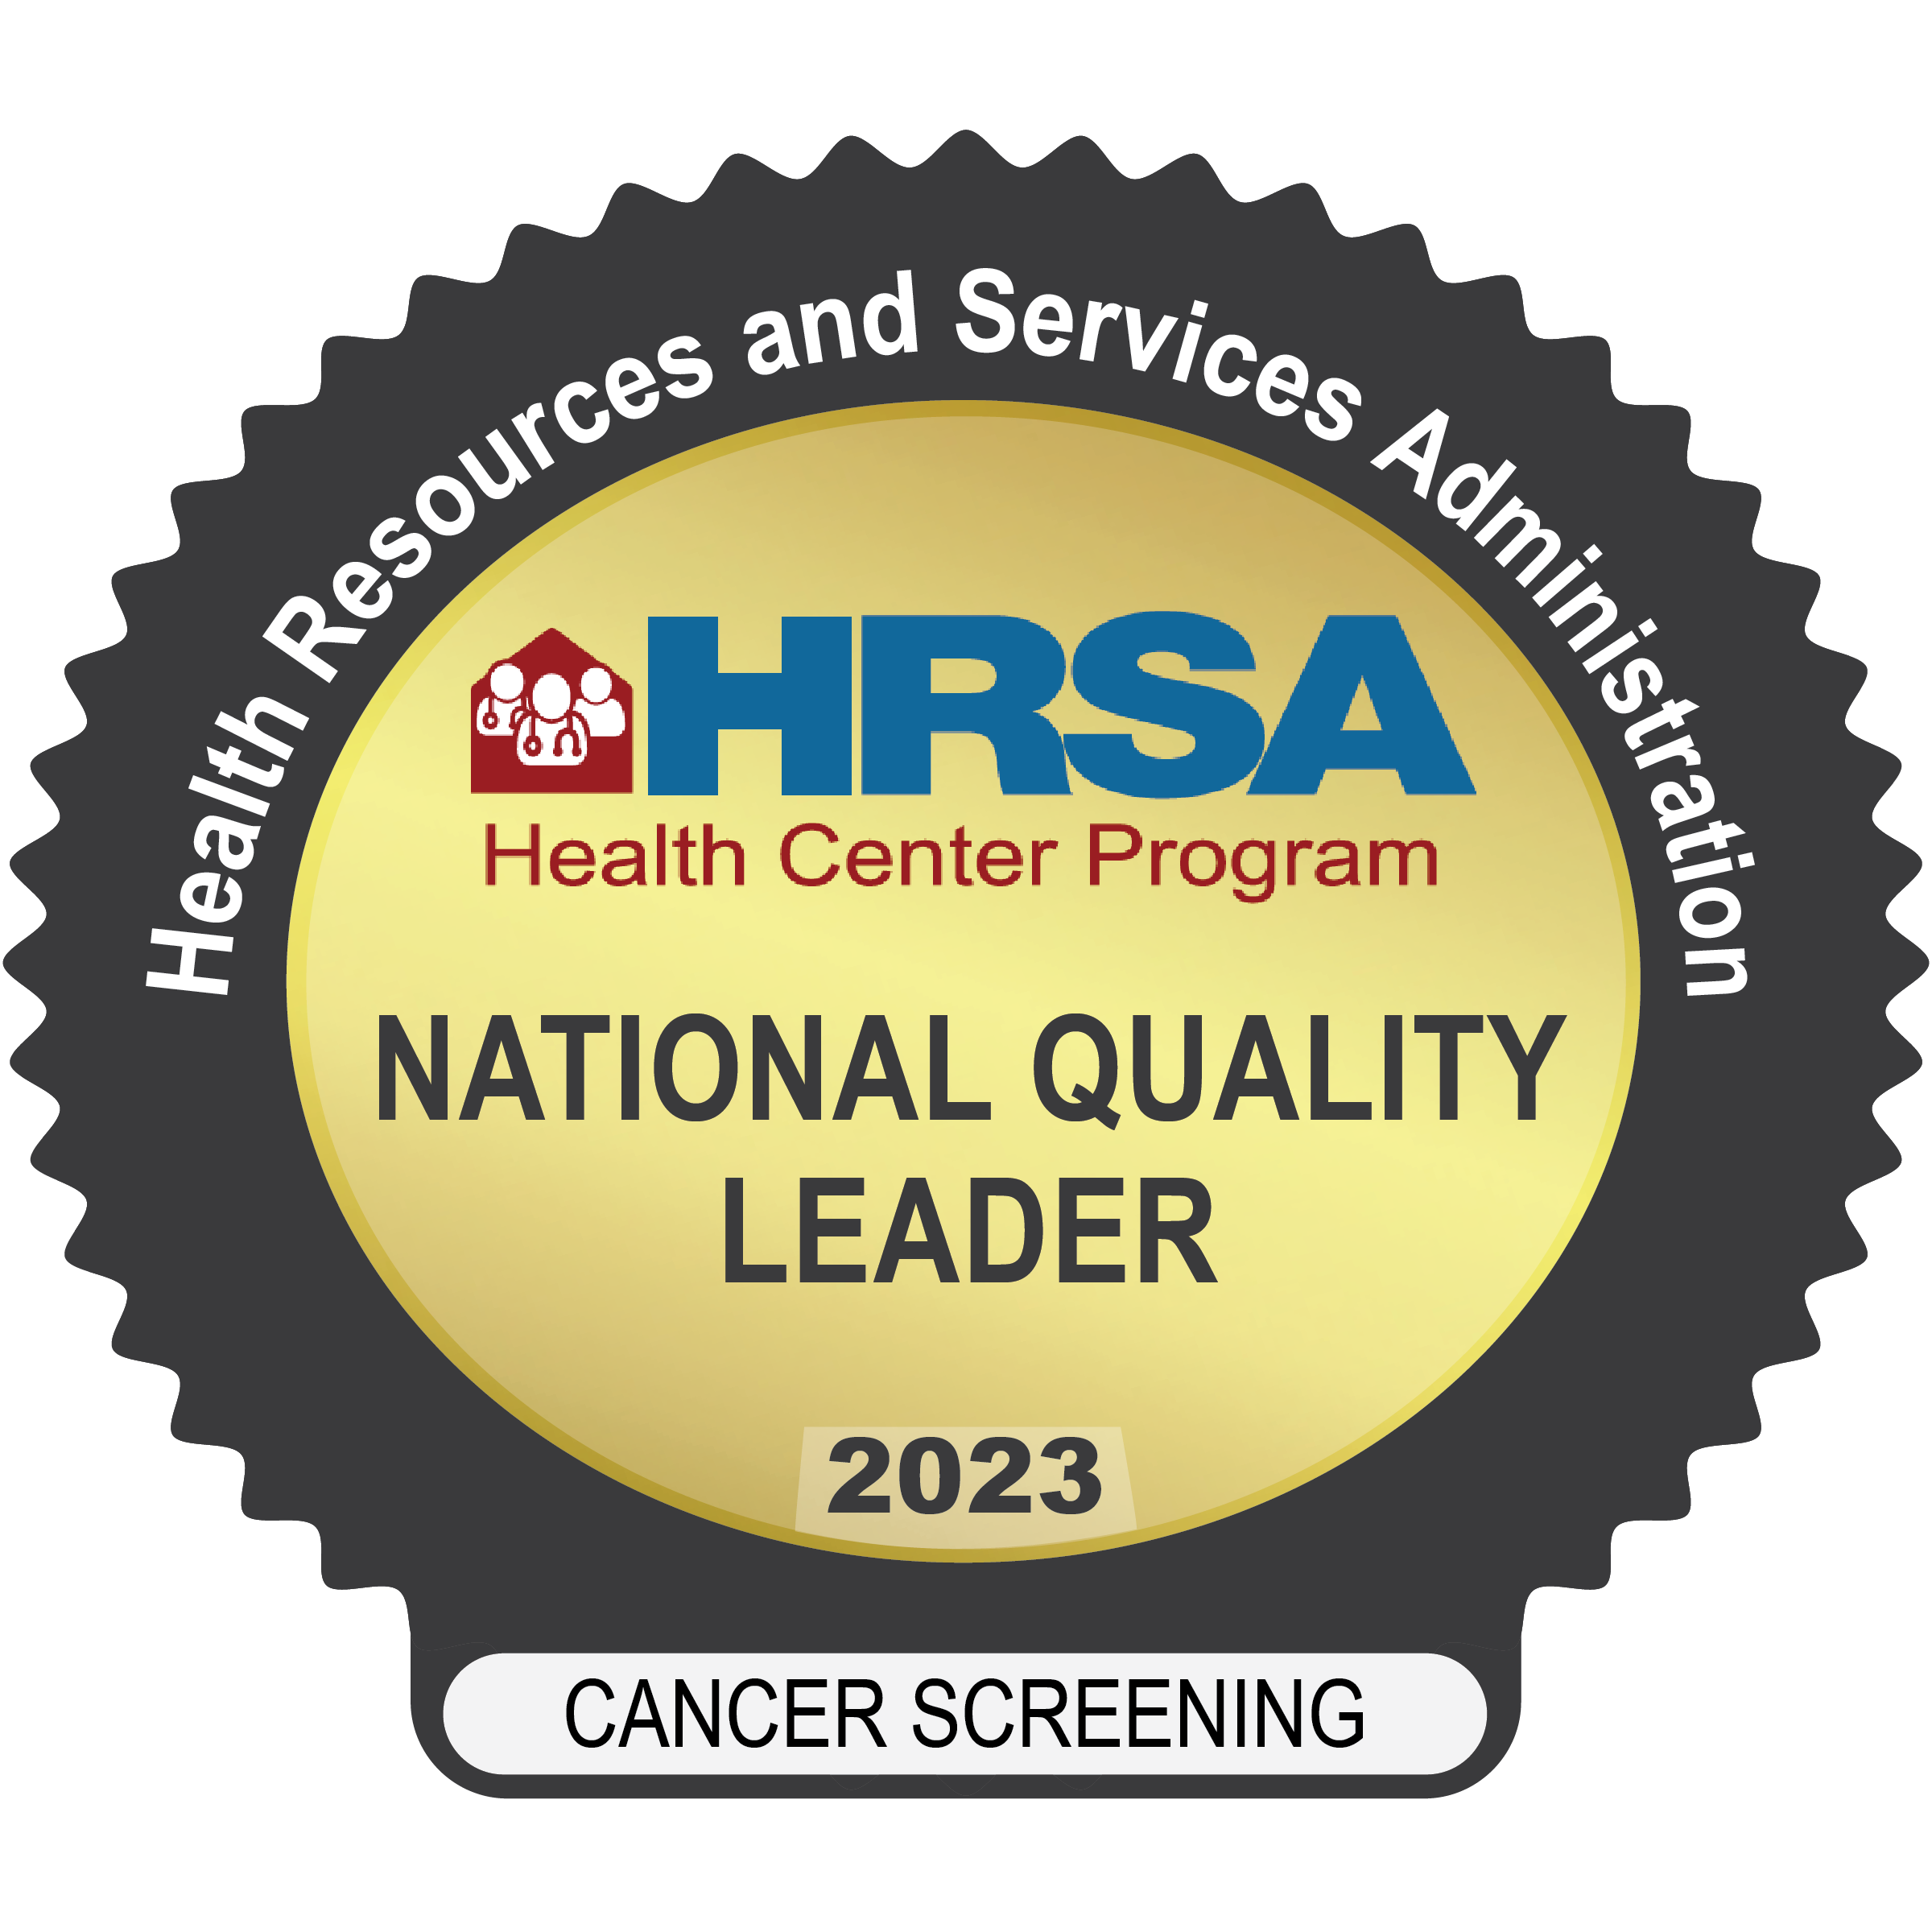 Health Resources and Services Administration. Health Center Program. National Quality Leader 2023 Cancer screening